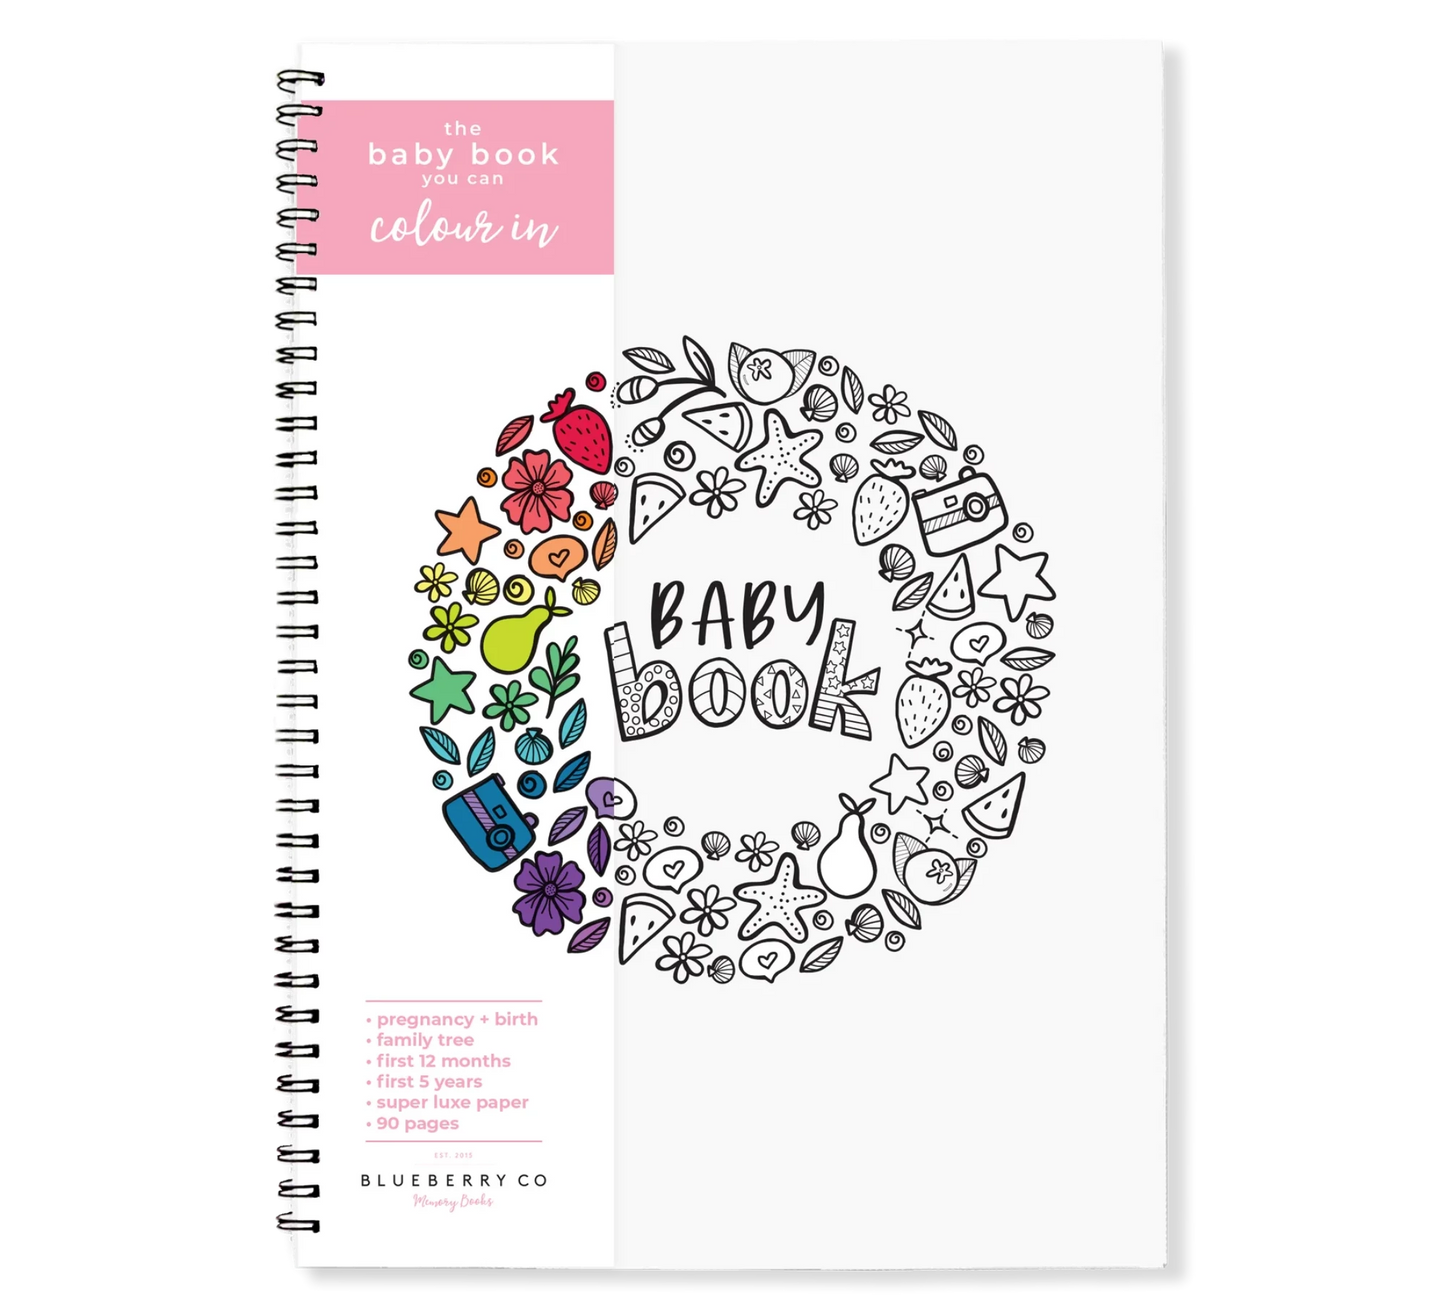 Keepsake Gifts The Monochrome Baby Book Blueberry Co Memory Books